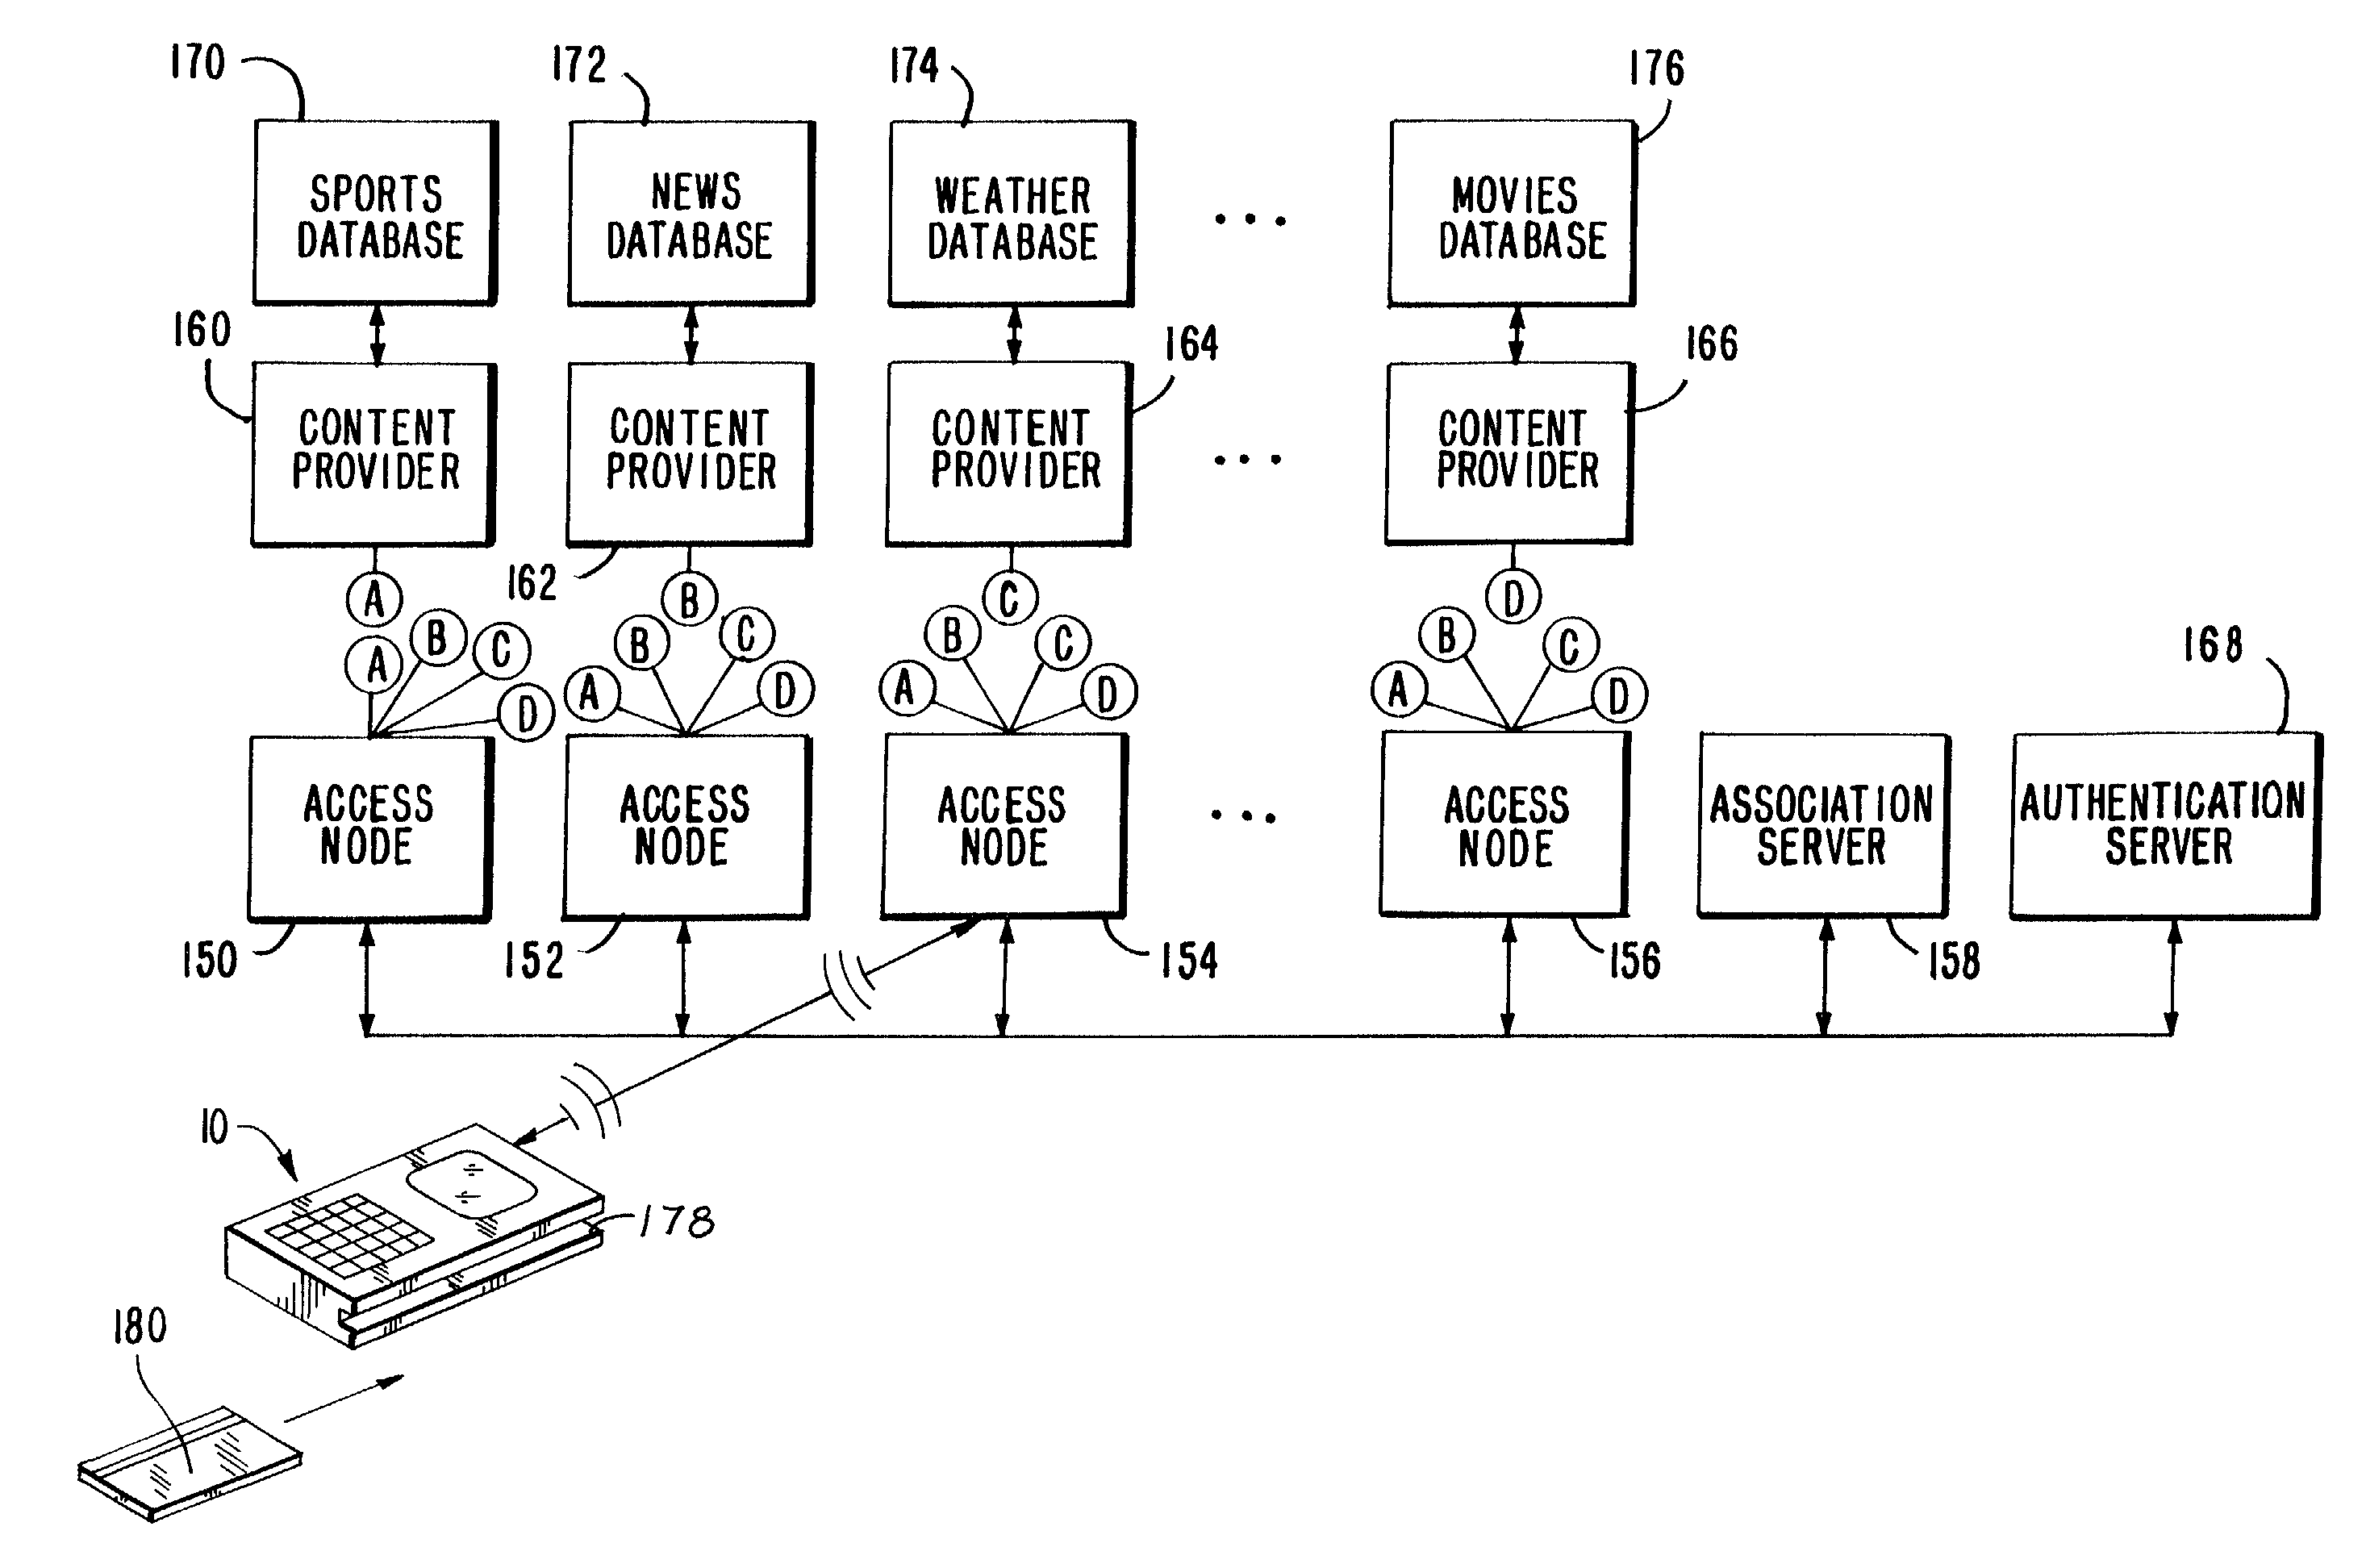 Communications network with wireless gateways for mobile terminal access